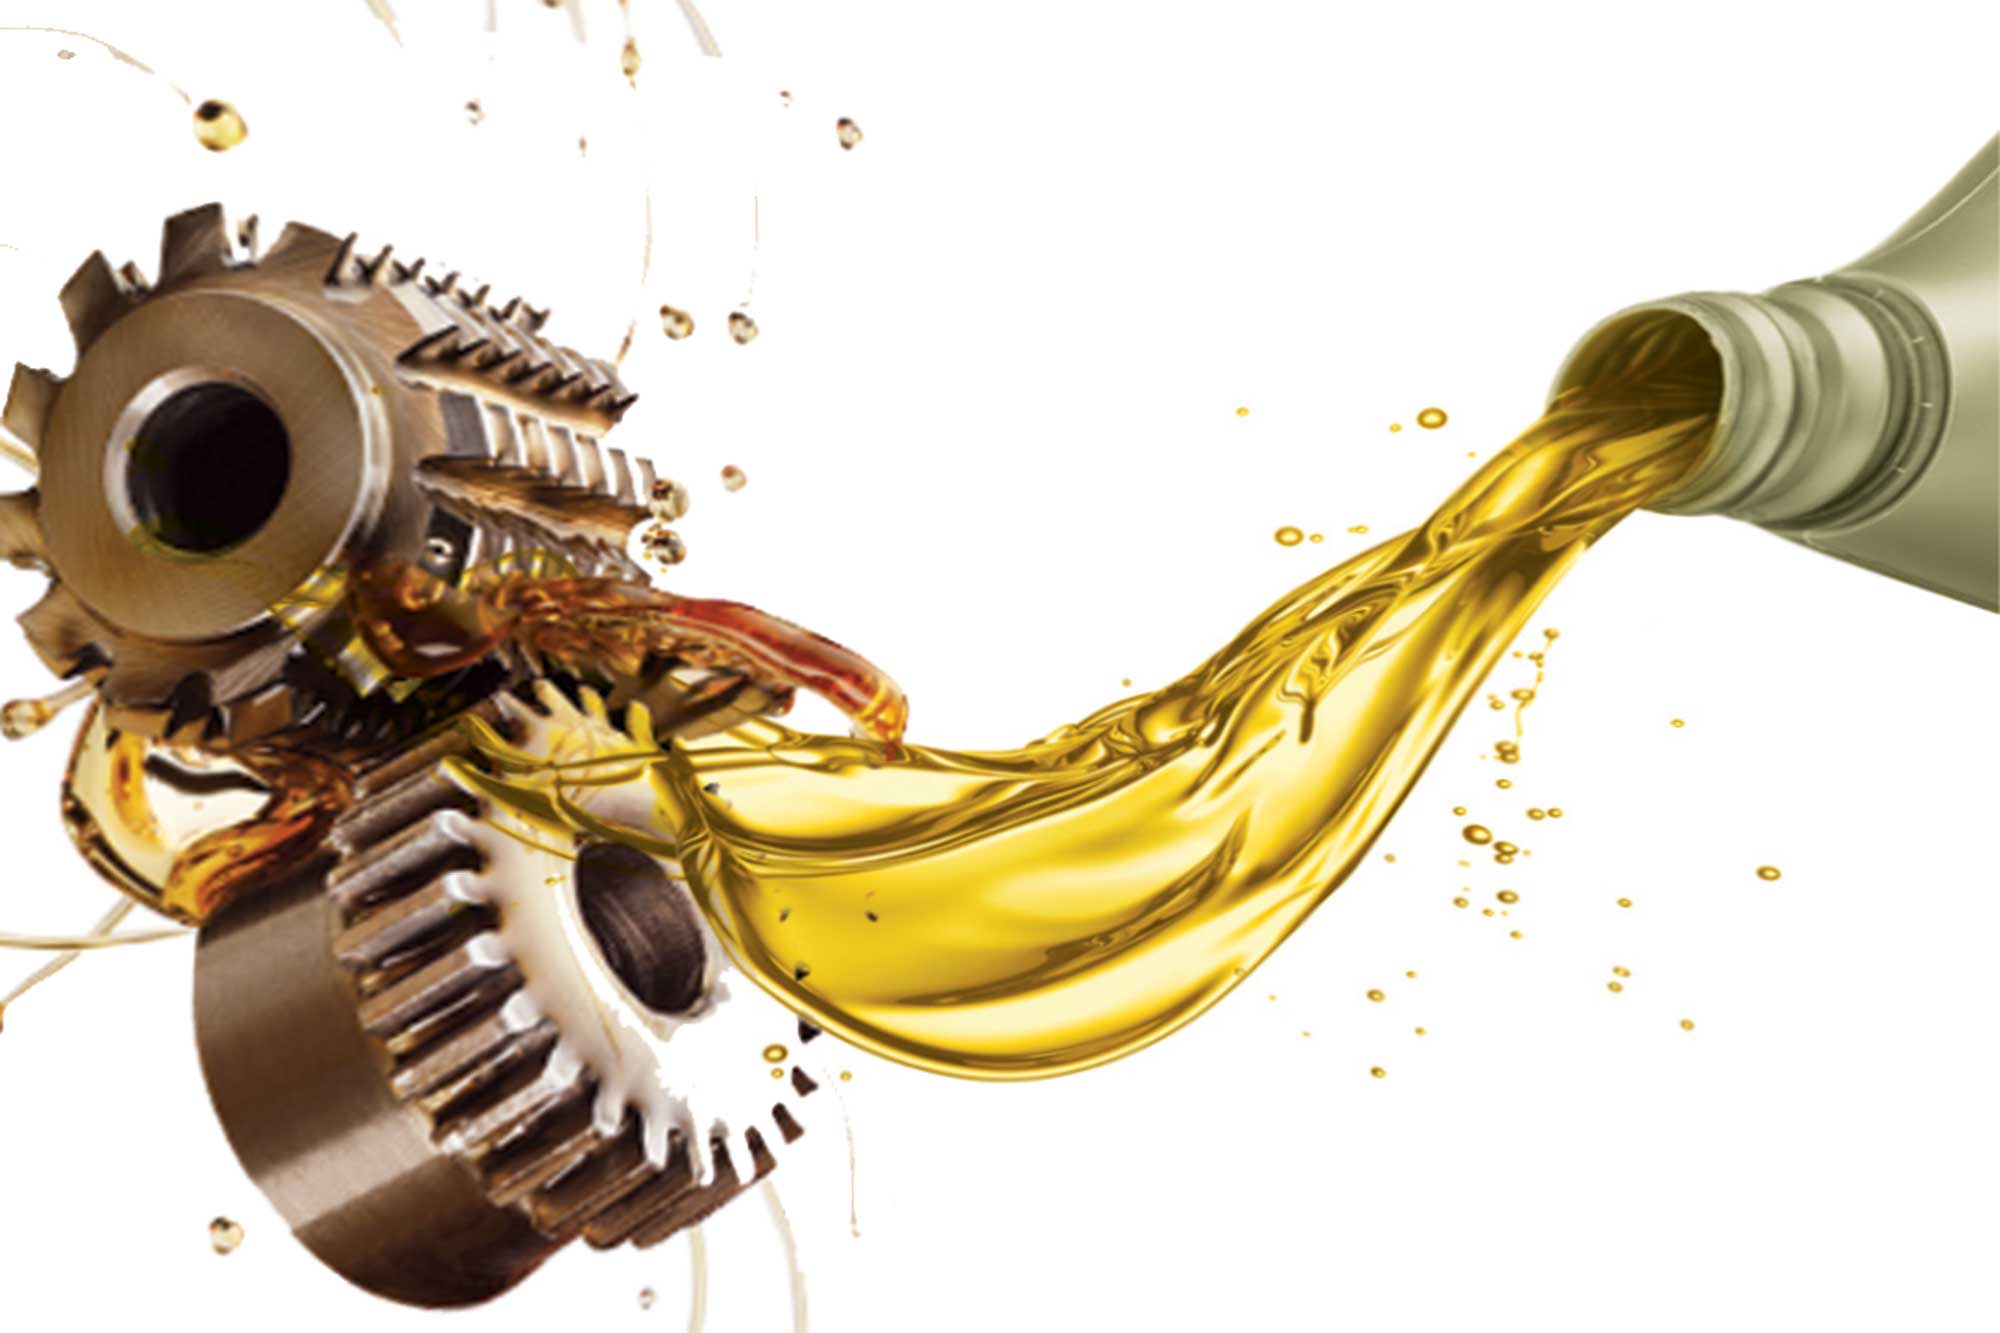 Europe Industrial Lubricants Market is estimated to reach USD 7,710.3 Million by 2032 with a CAGR of 5.2%.